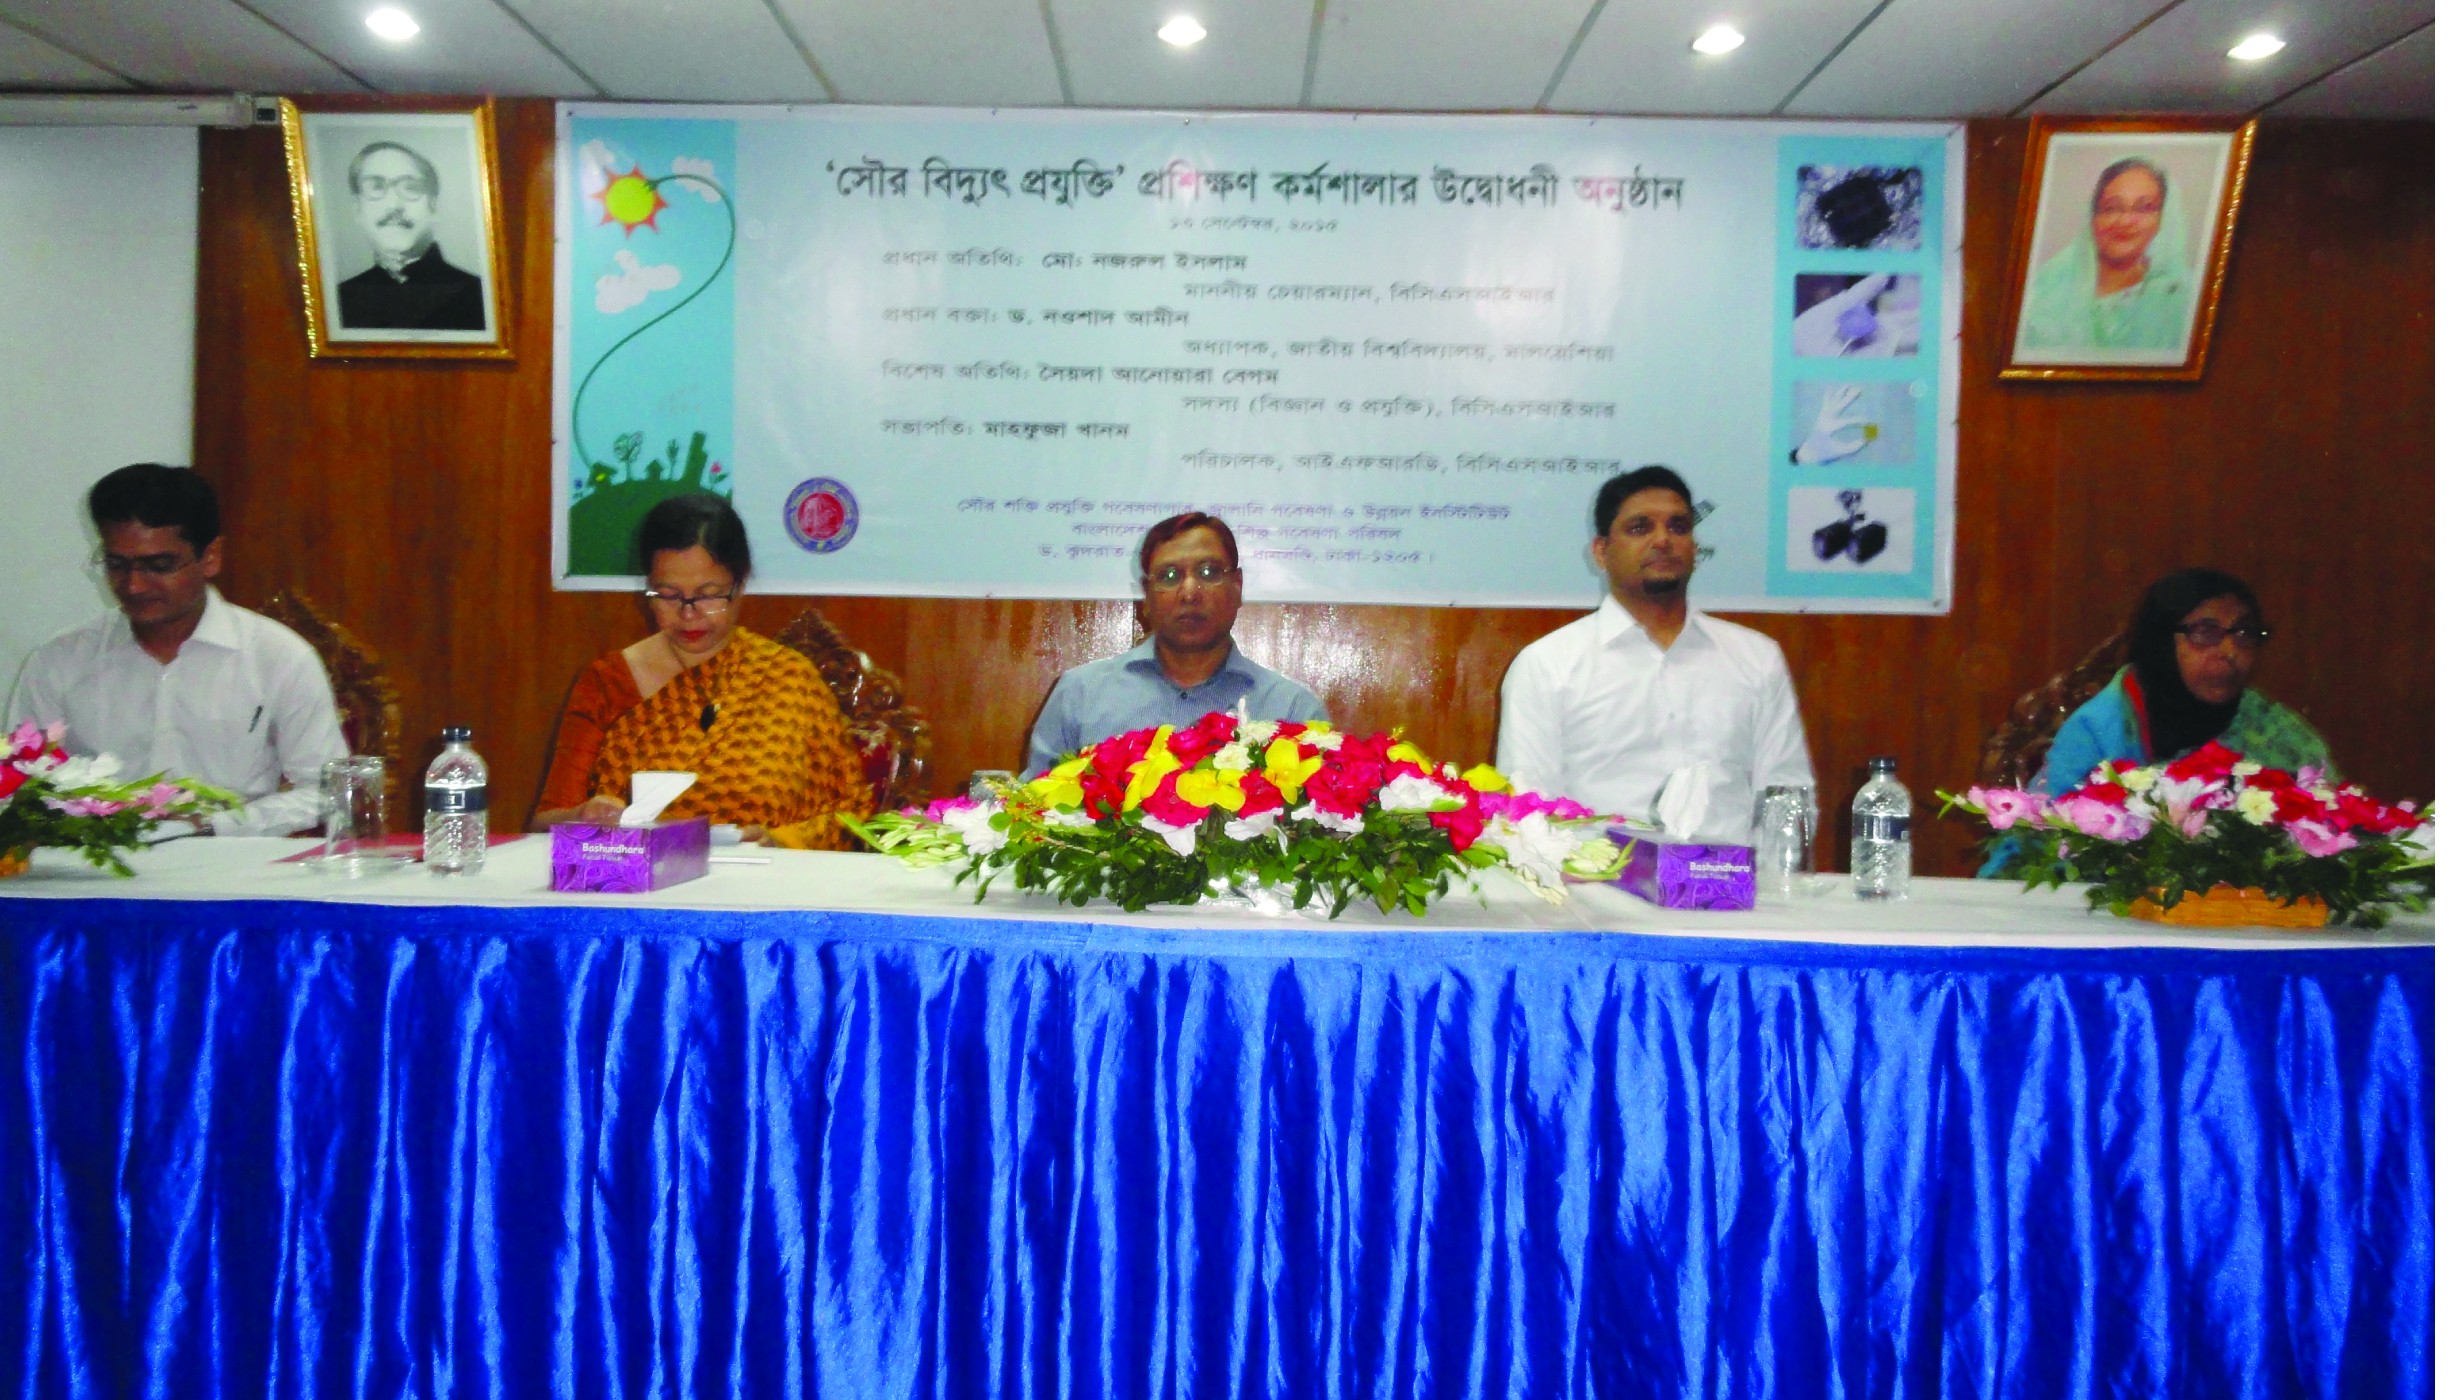 The Chairman attends as chief guest to training workshop on Thin Film Solar Cell Research Activities, organized by BCSIR.